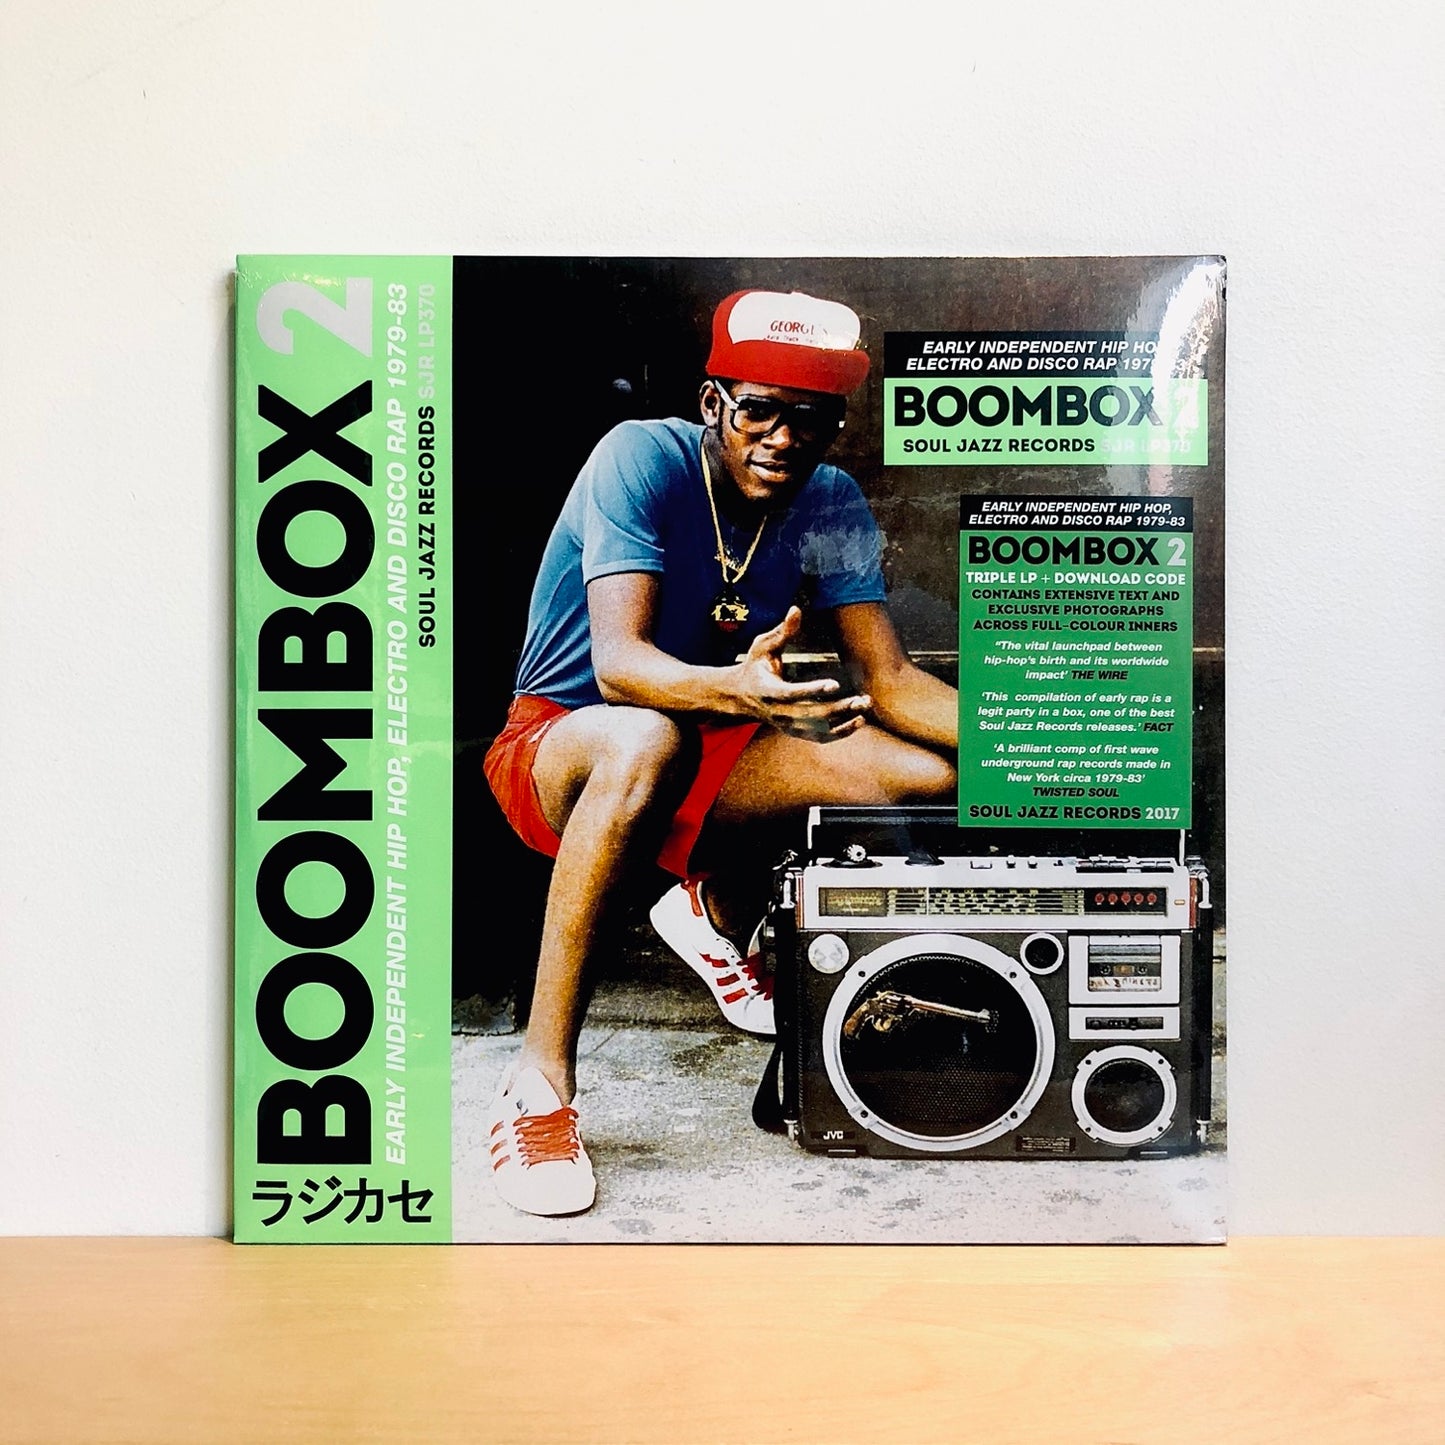 Soul Jazz Records Presents - Boombox 2, Early Independent Hip Hop, Disco & Rap 1979-83. 3LP